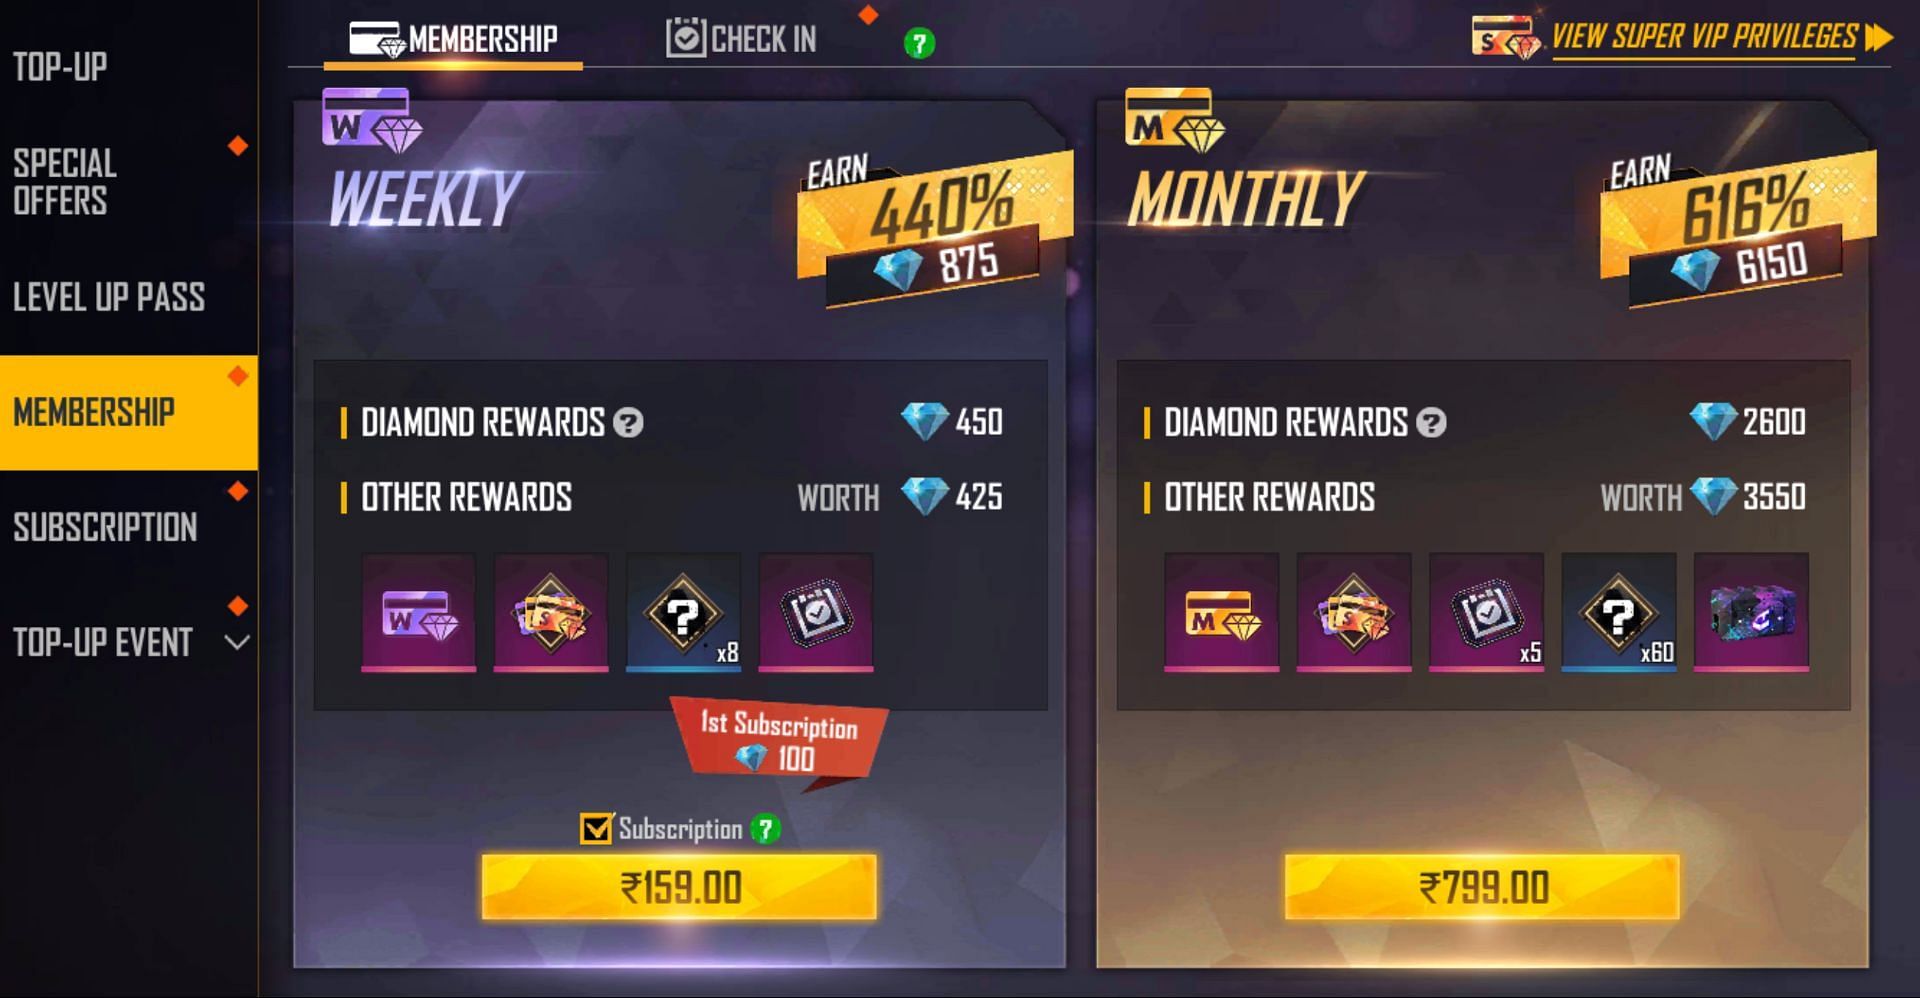 There are two different types of memberships available within the game (Image via Garena)